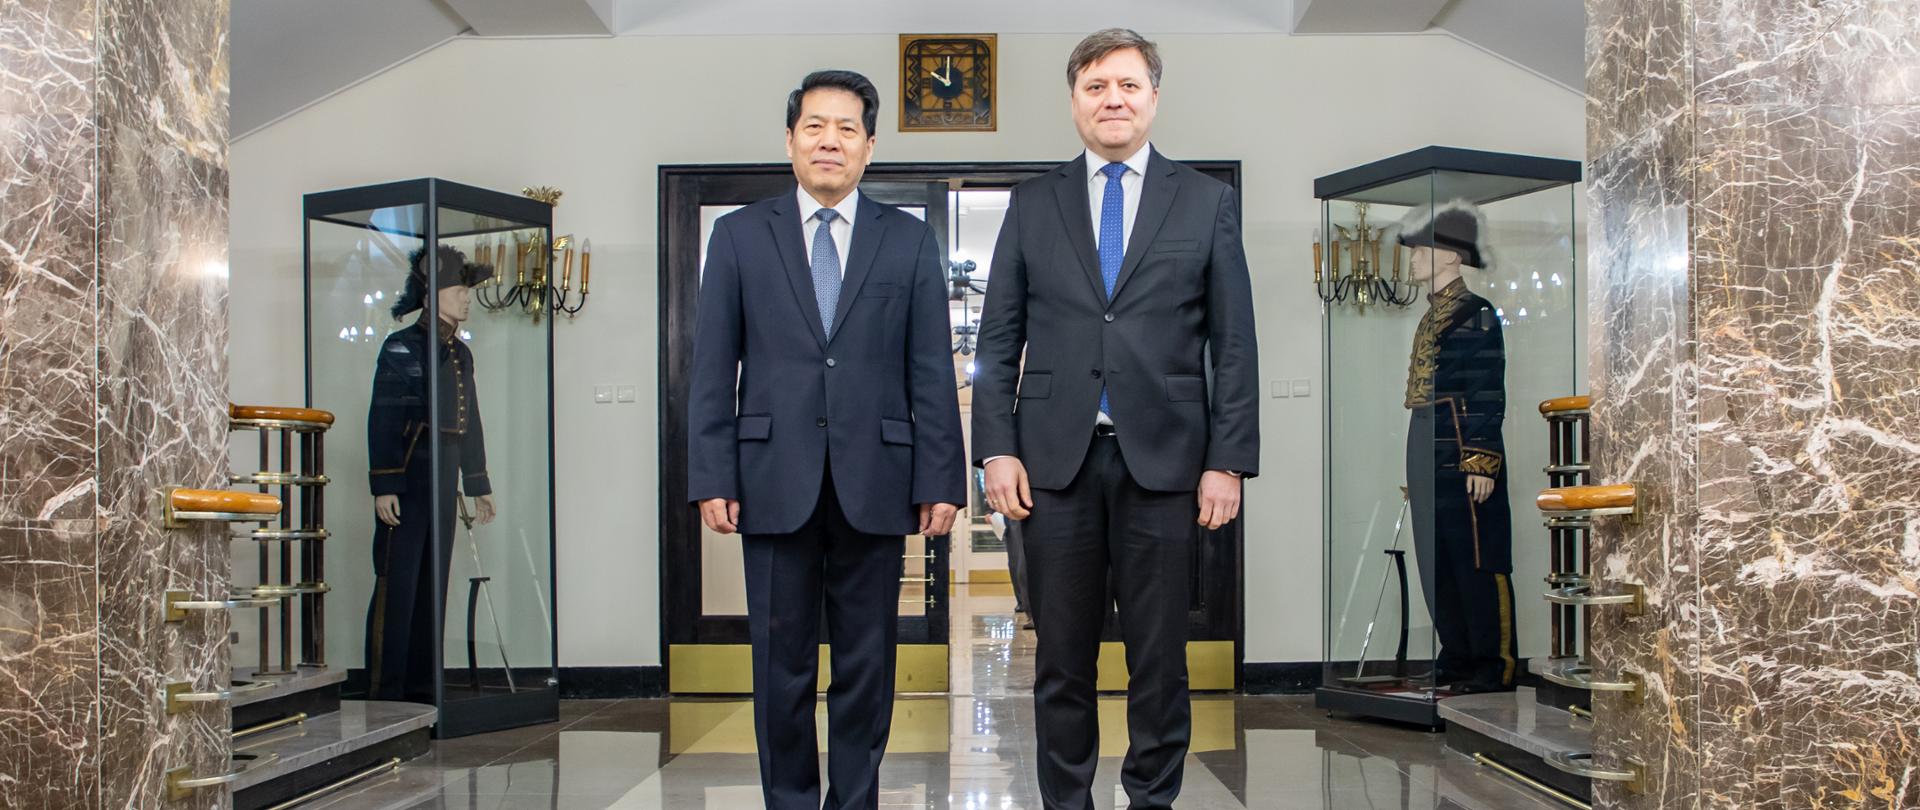 Deputy Minister Wojciech Gerwel - meeting with the special envoy of the government of the People's Republic of China for Eurasia, Ambassador Li Hui